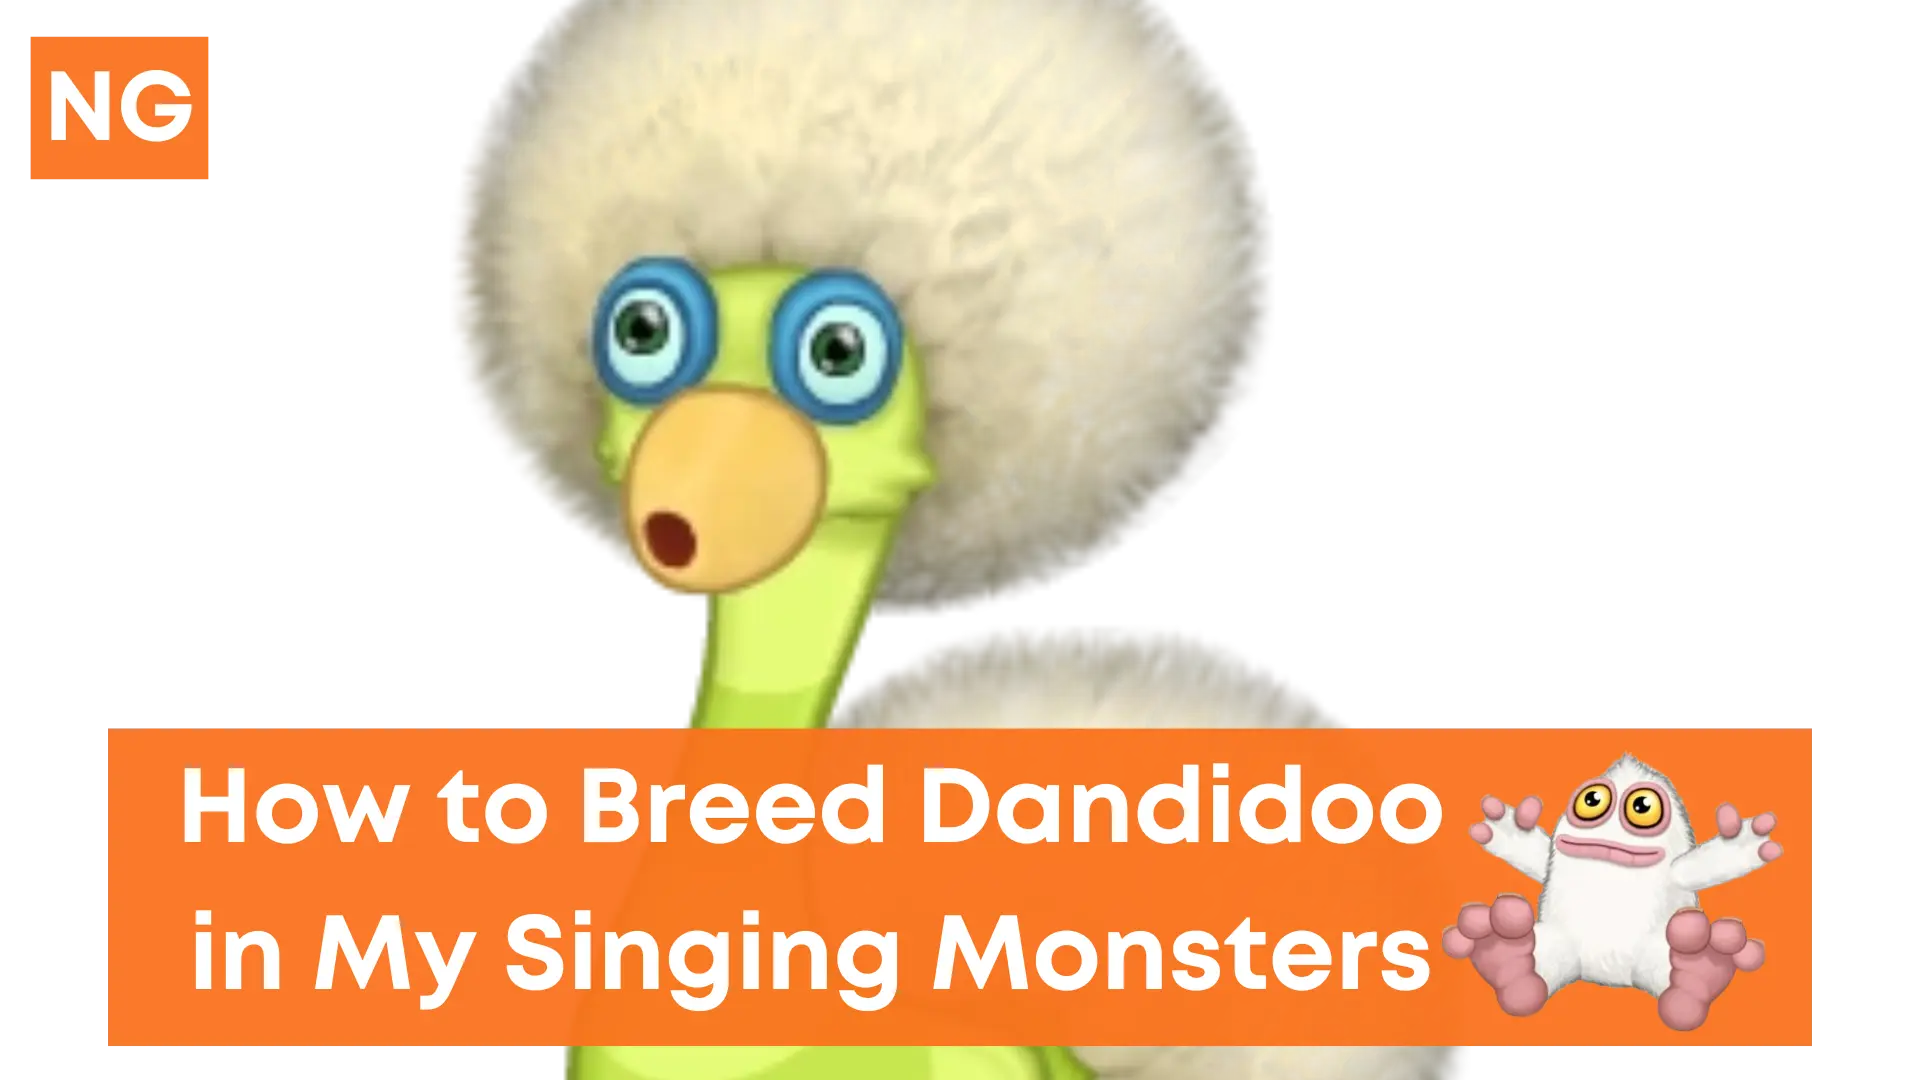 How to Breed a Dandidoo in My Singing Monsters (1)